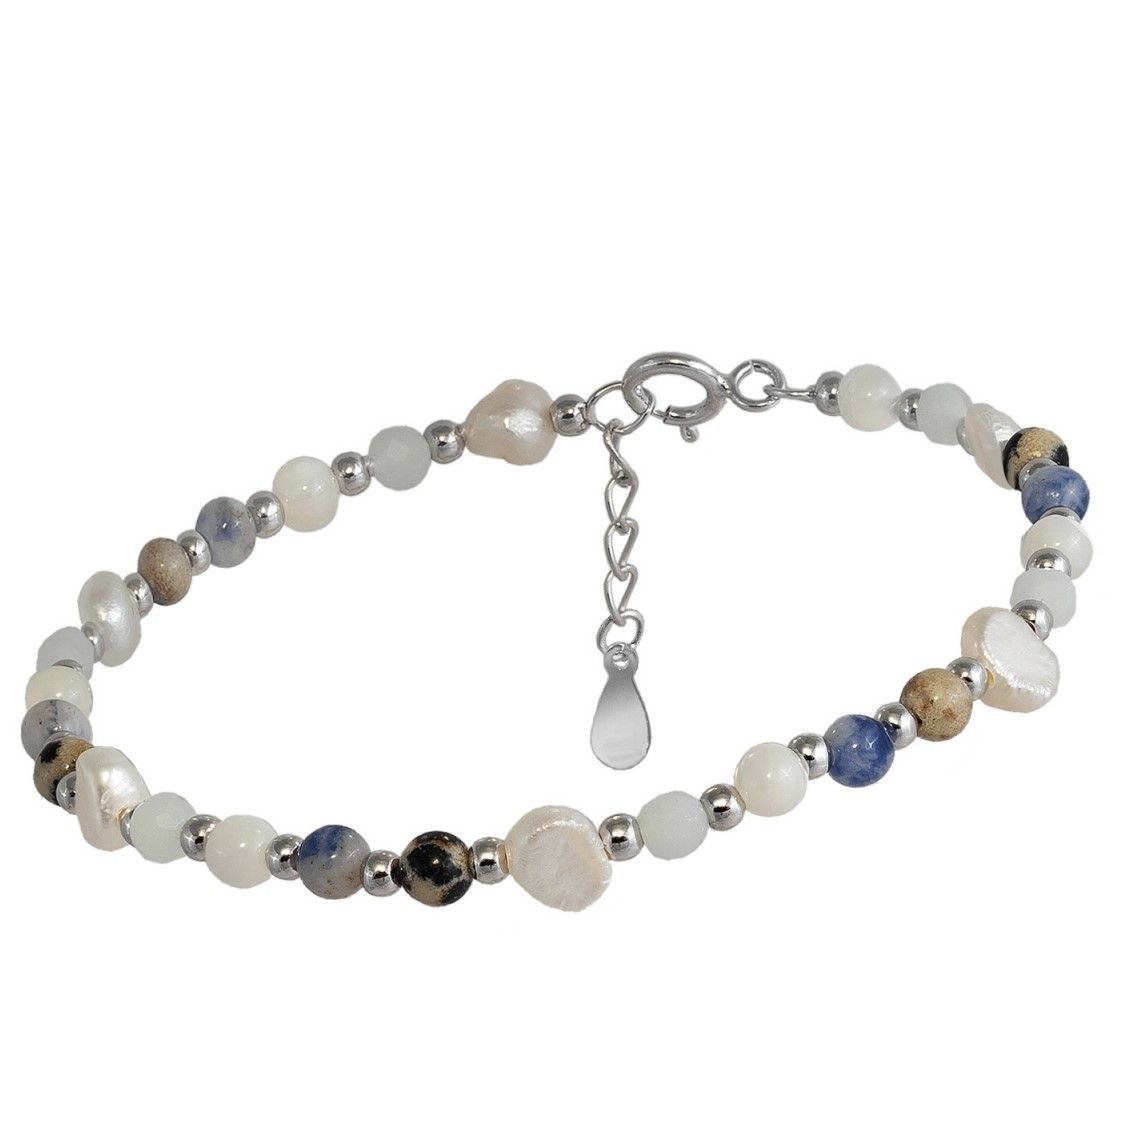 SILVER ANKLET WITH BLUE STONES AND PEARLS